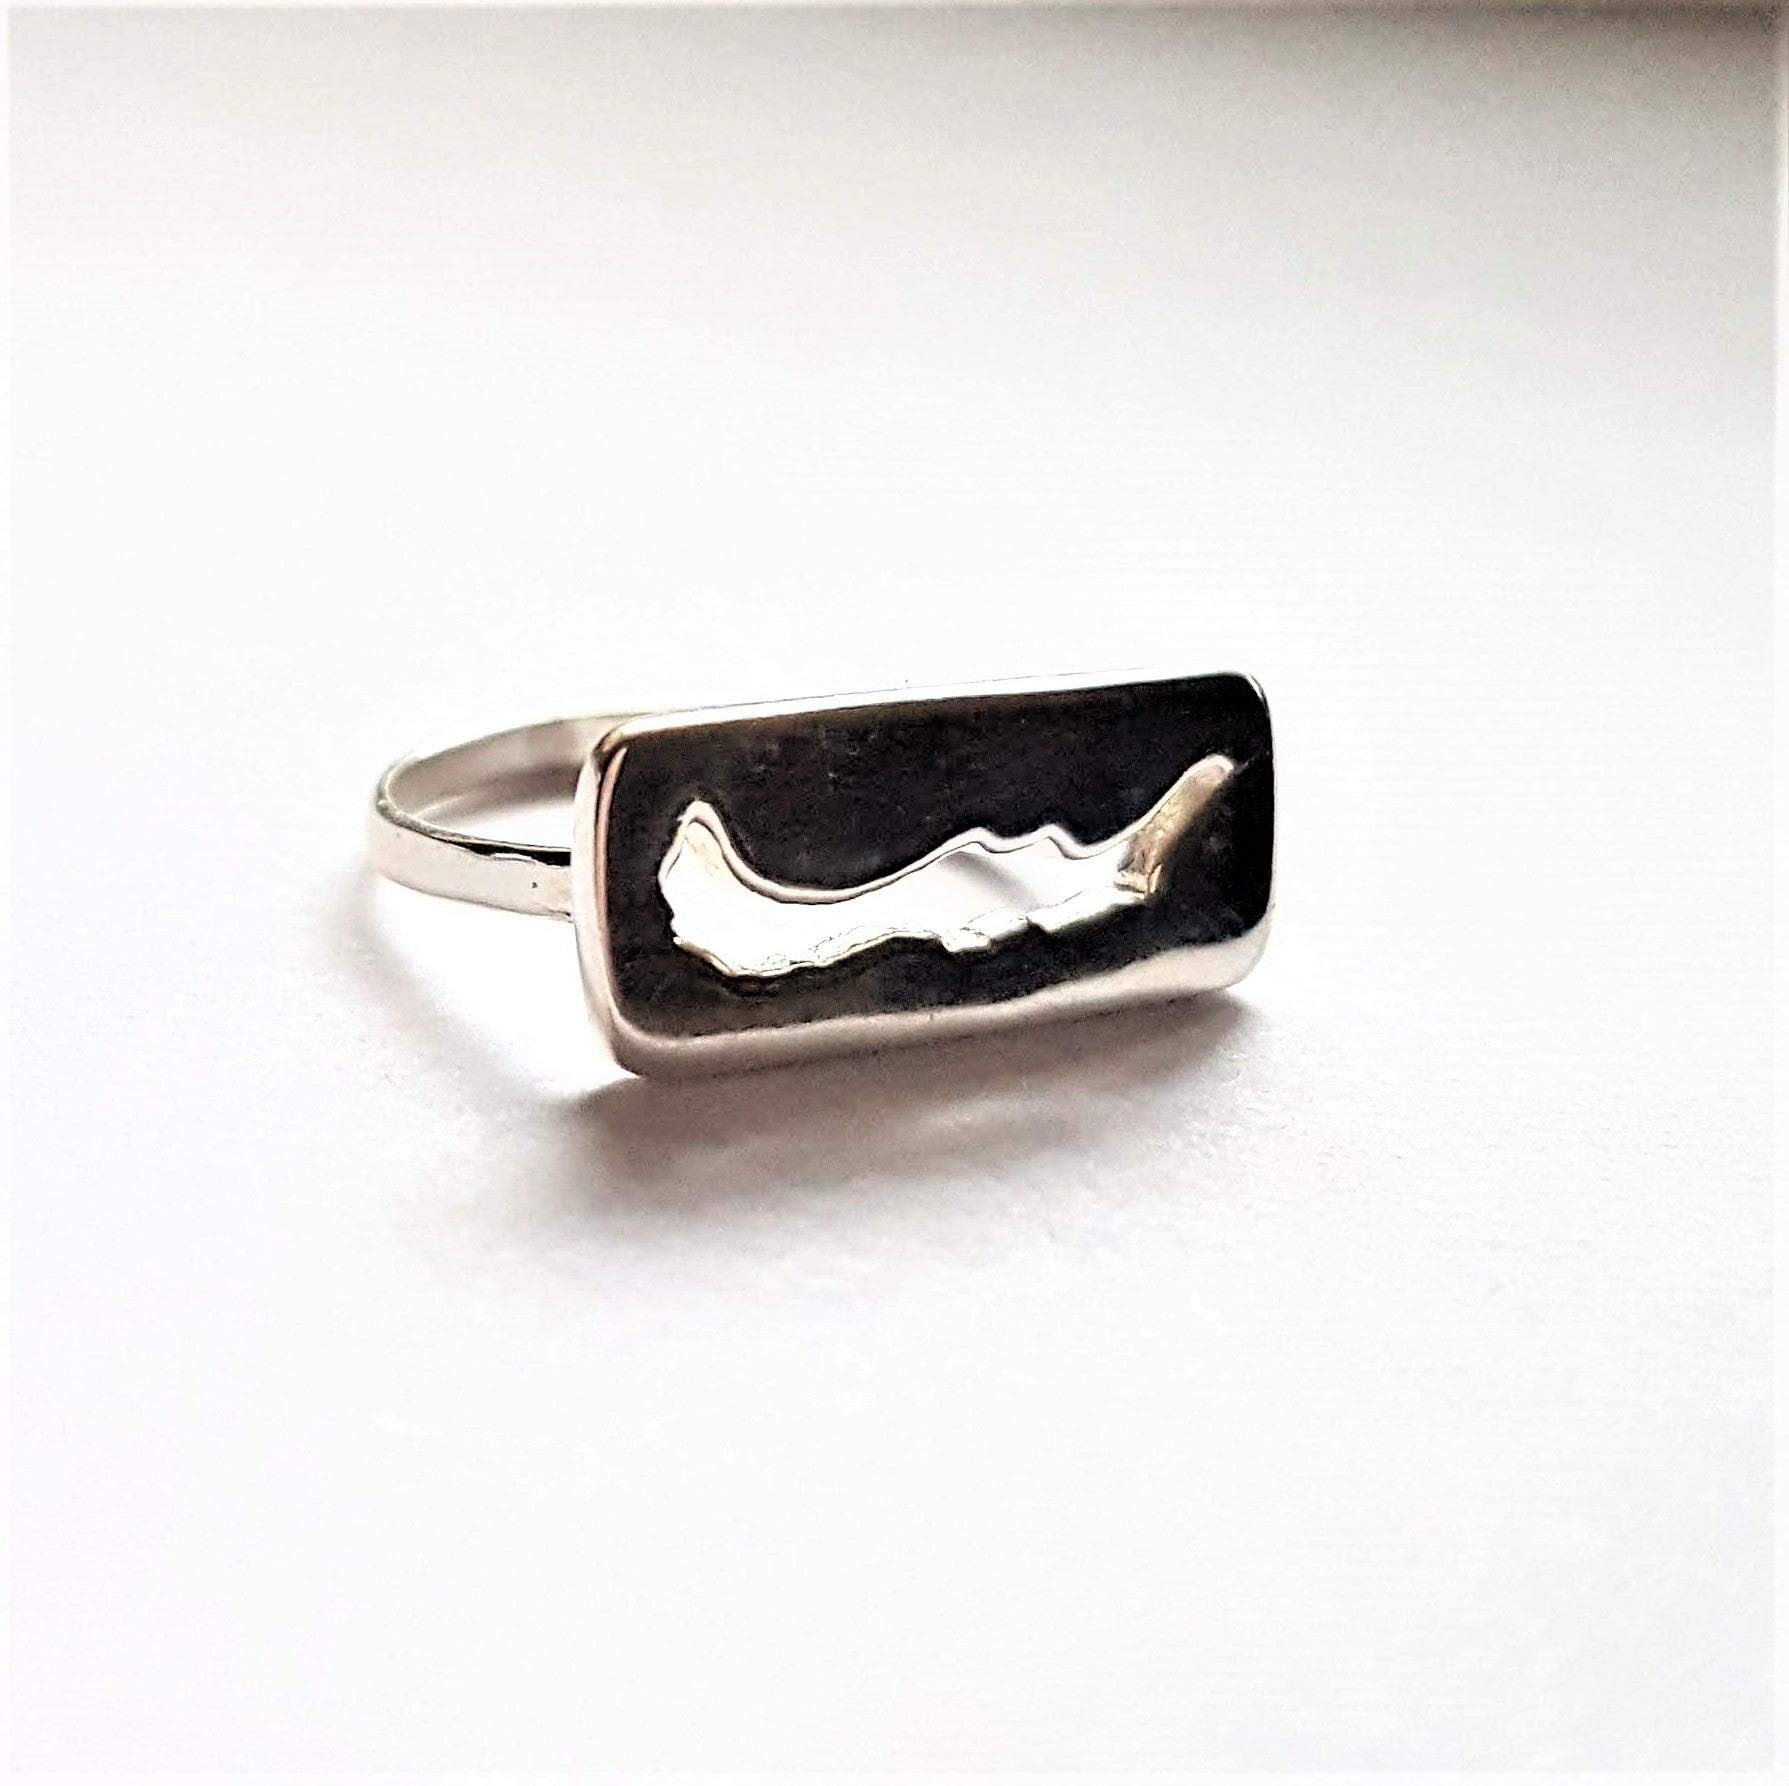 Savary island Ring. sterling silver ring with rectangle insignia with savary island shape cut out on white background